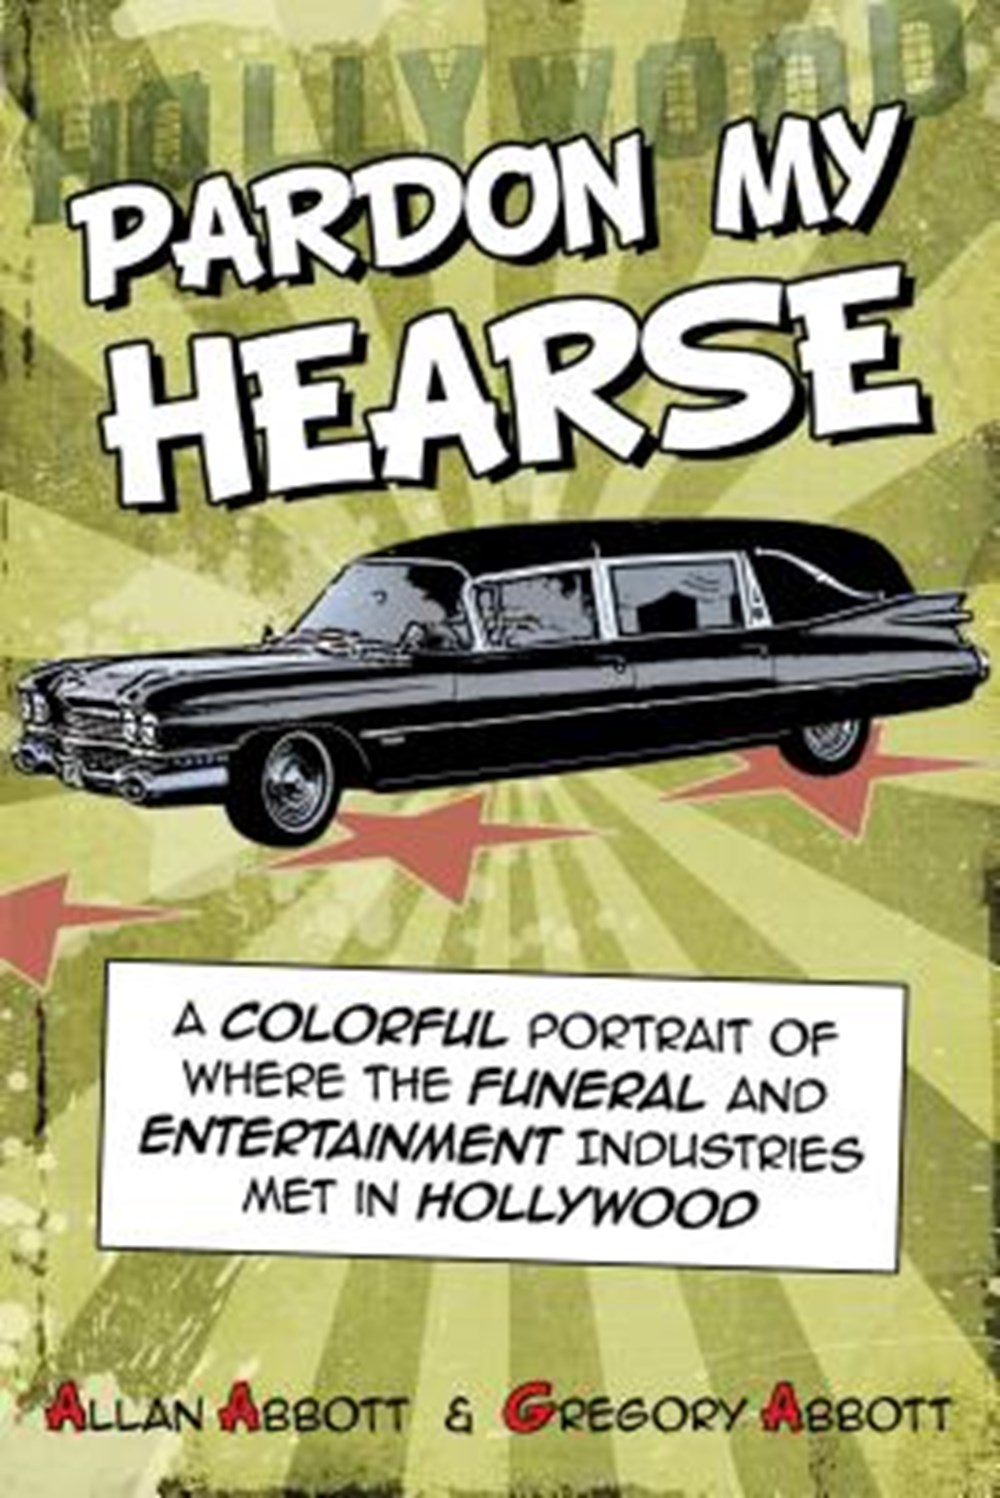 Pardon My Hearse A Colorful Portrait of Where the Funeral and Entertainment Industries Met in Hollyw